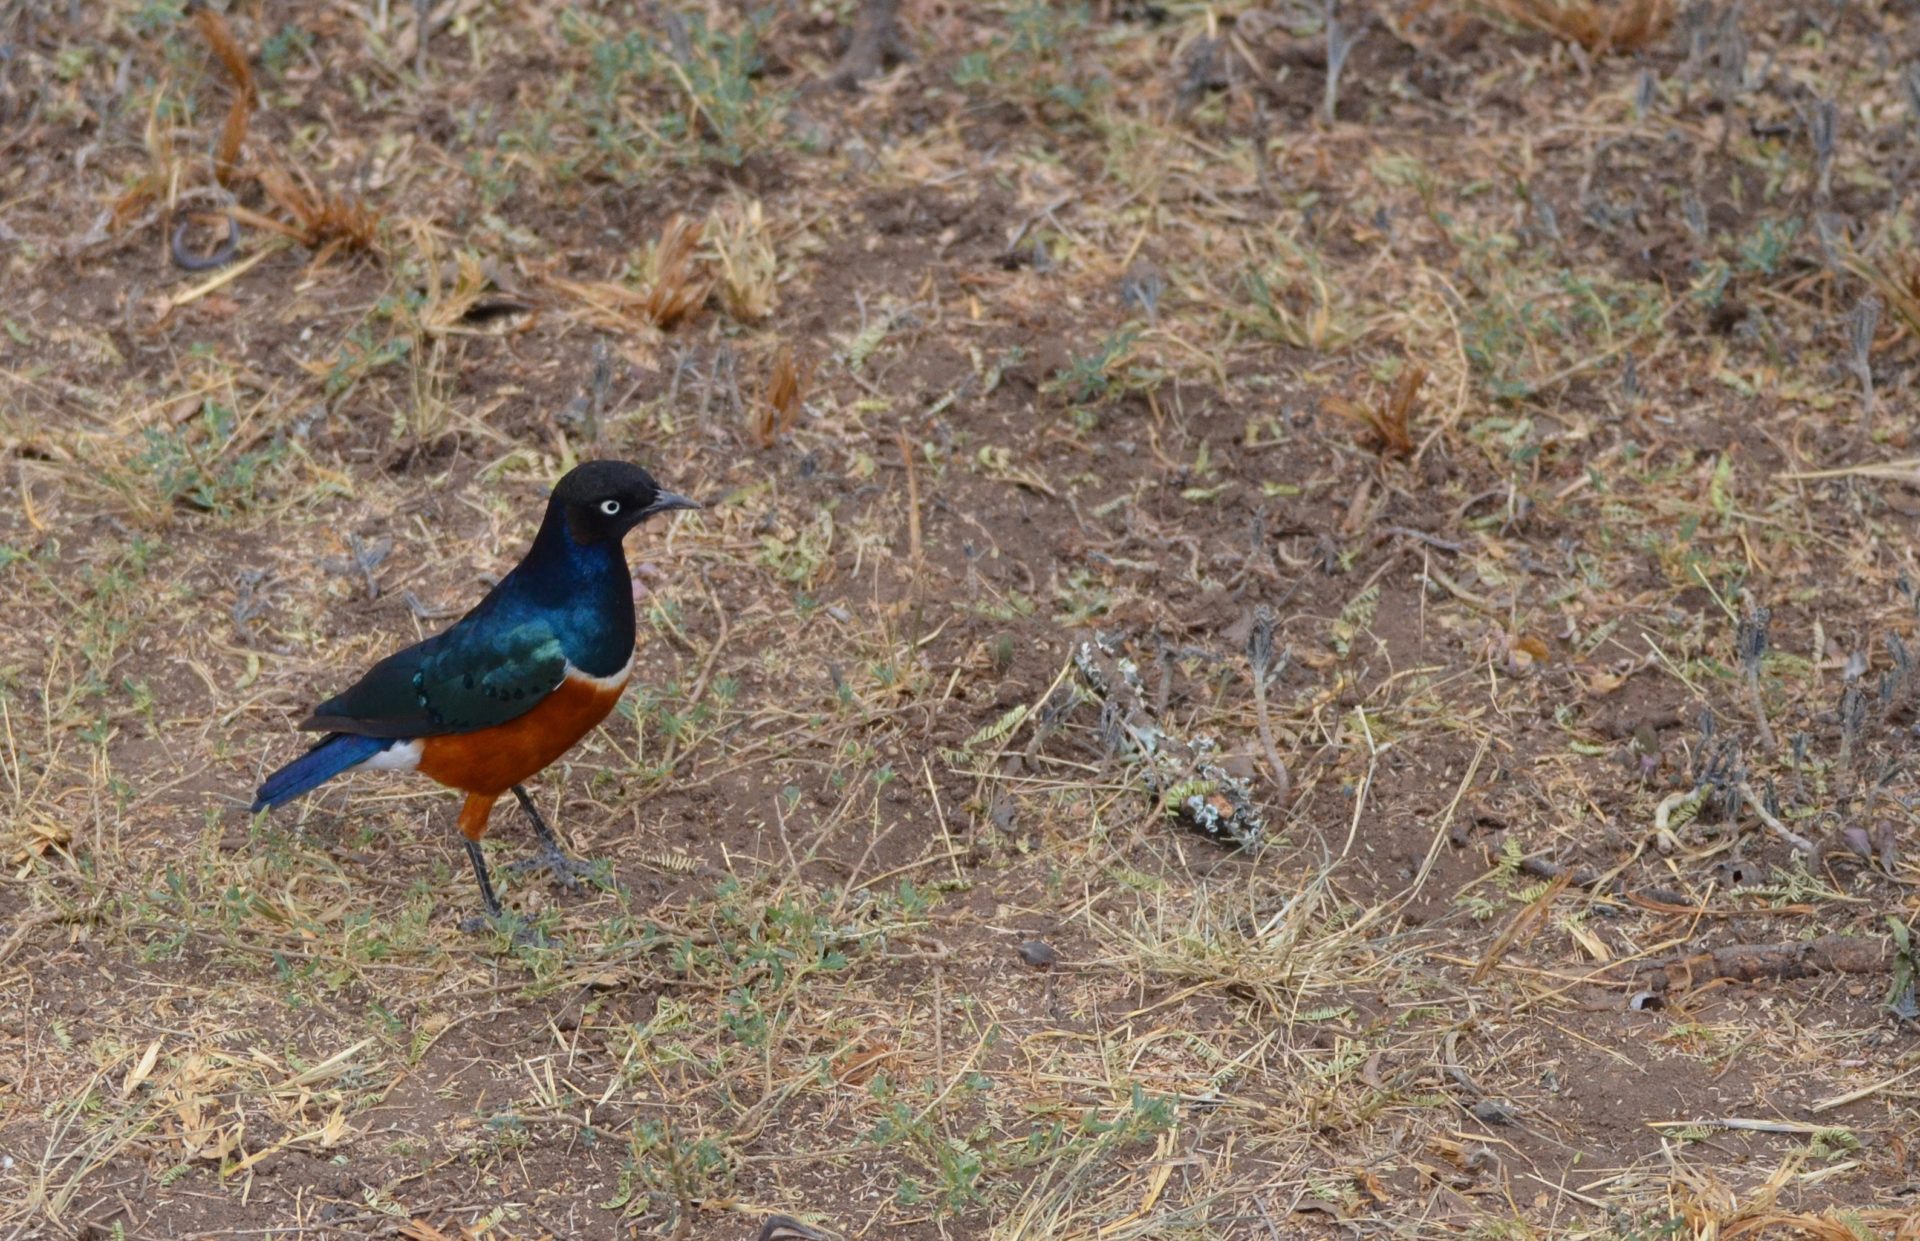 Superb Starling, Sweetwaters Camp